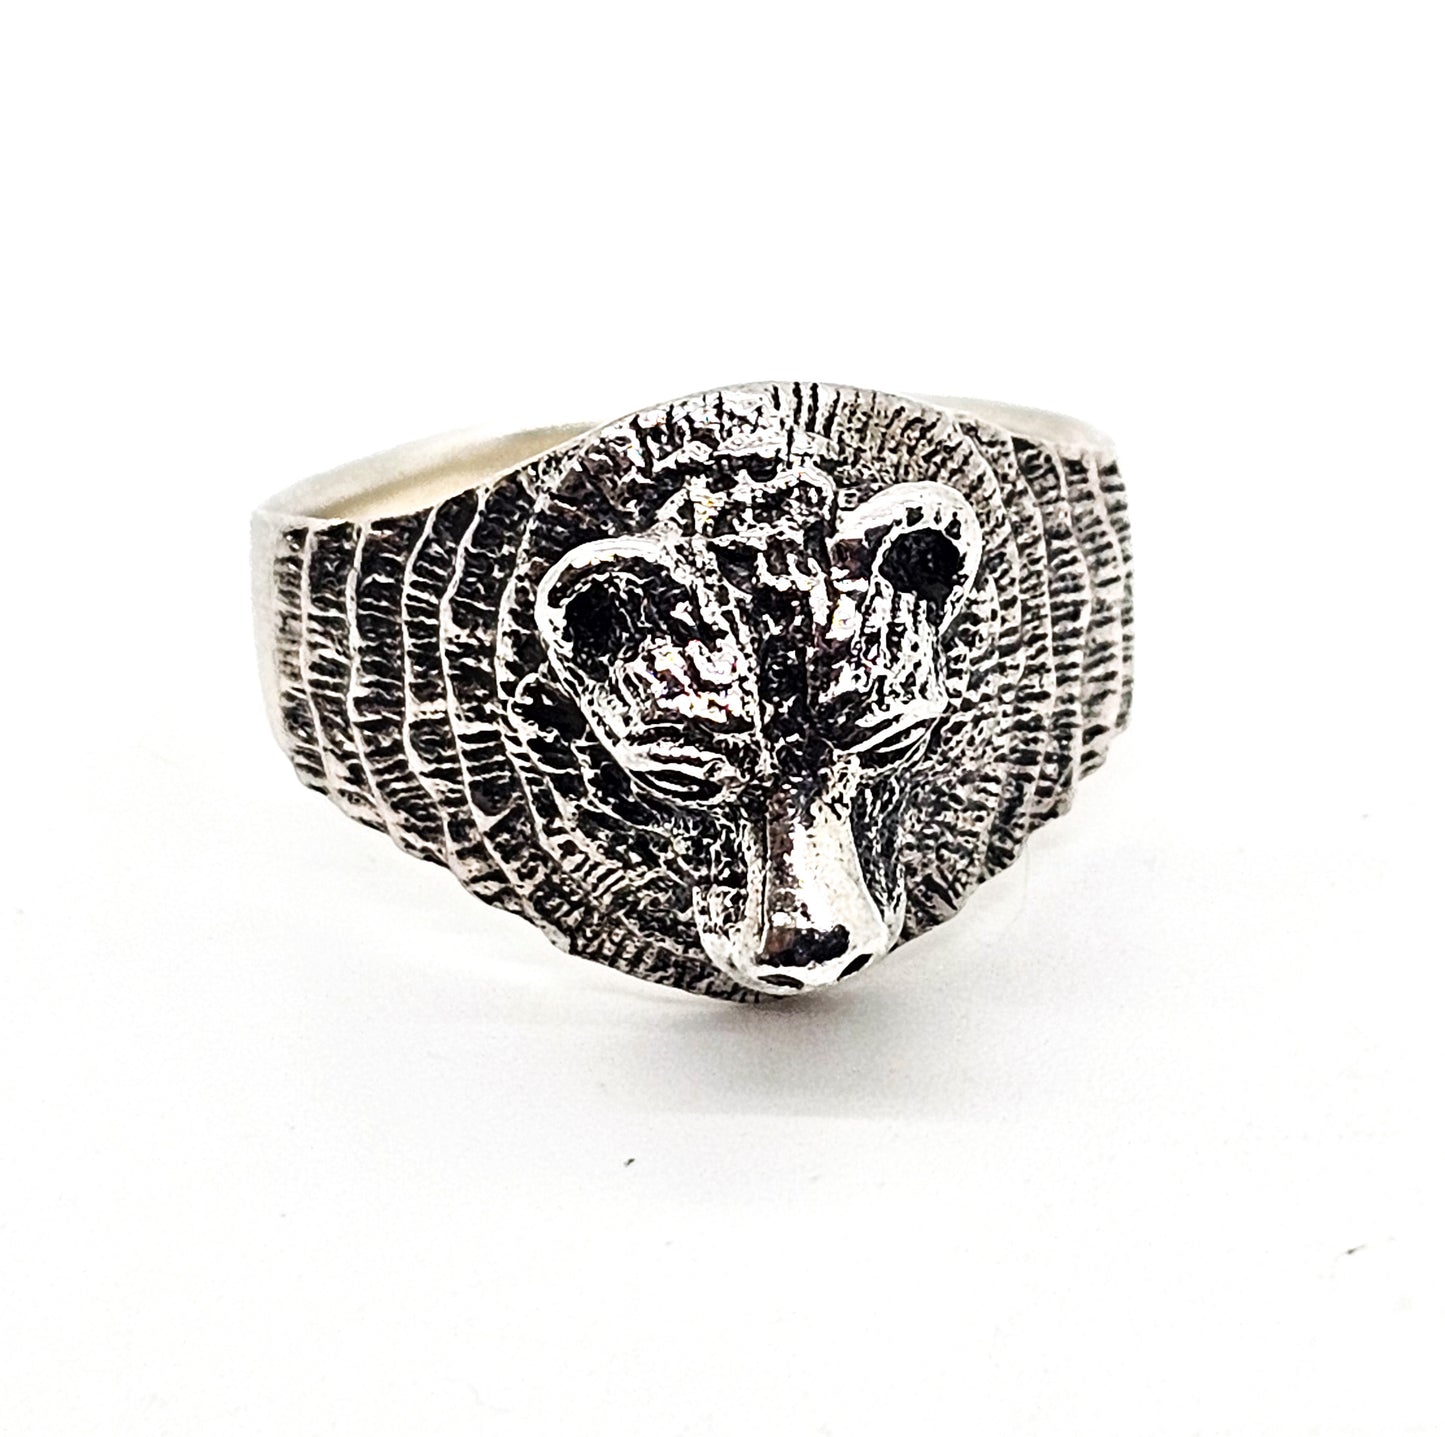 wTs Watson Hallmark Bear figural large solid sterling silver men's ring size 12